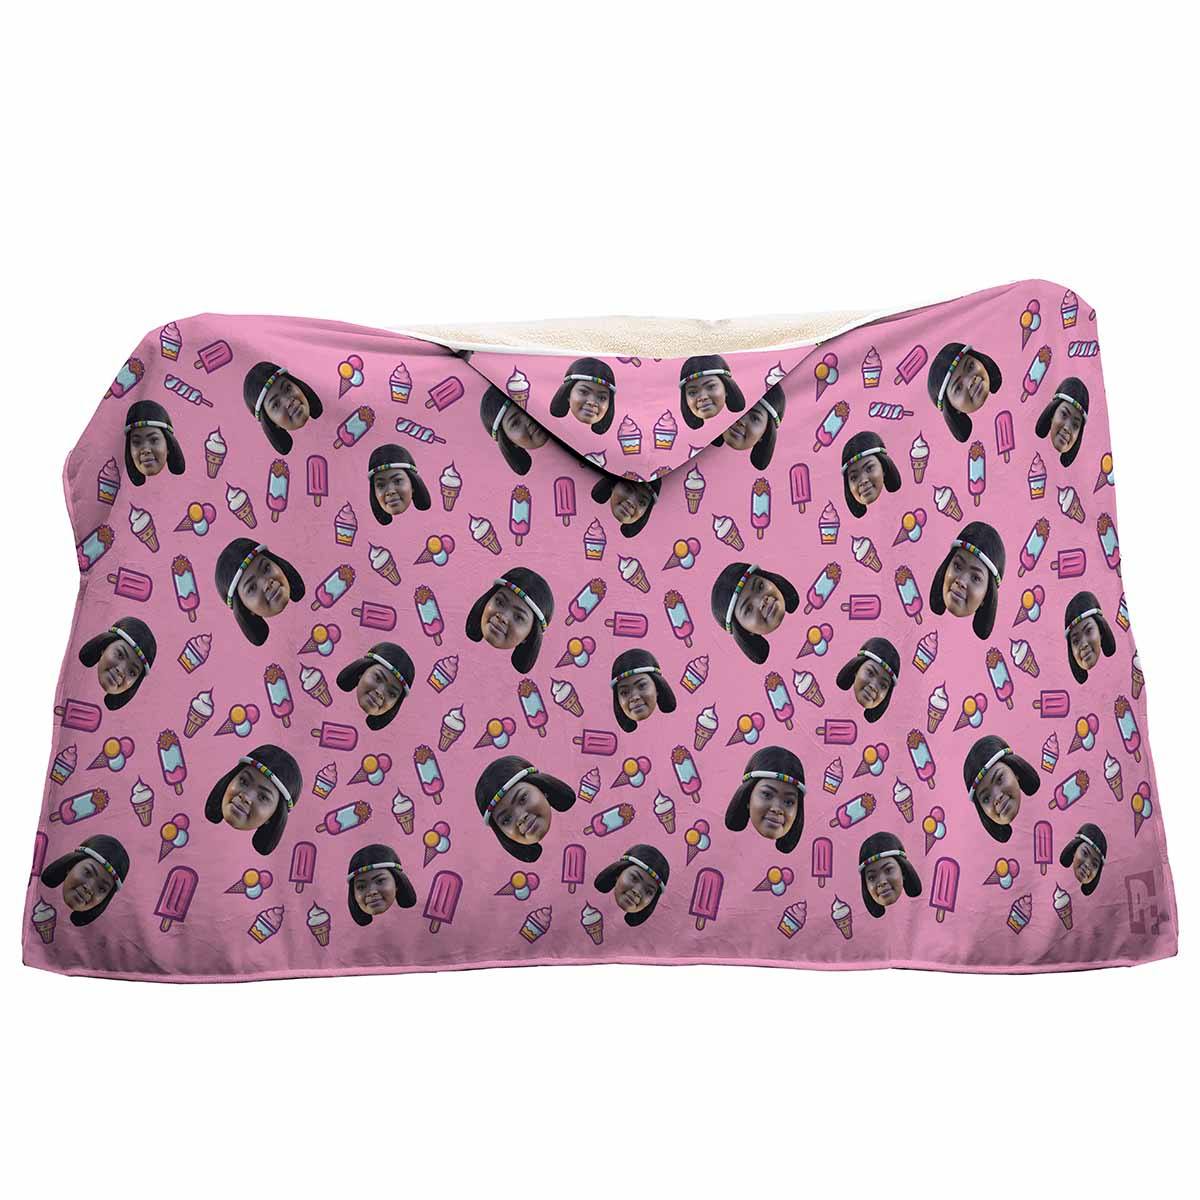 pink Candies hooded blanket personalized with photo of face printed on it